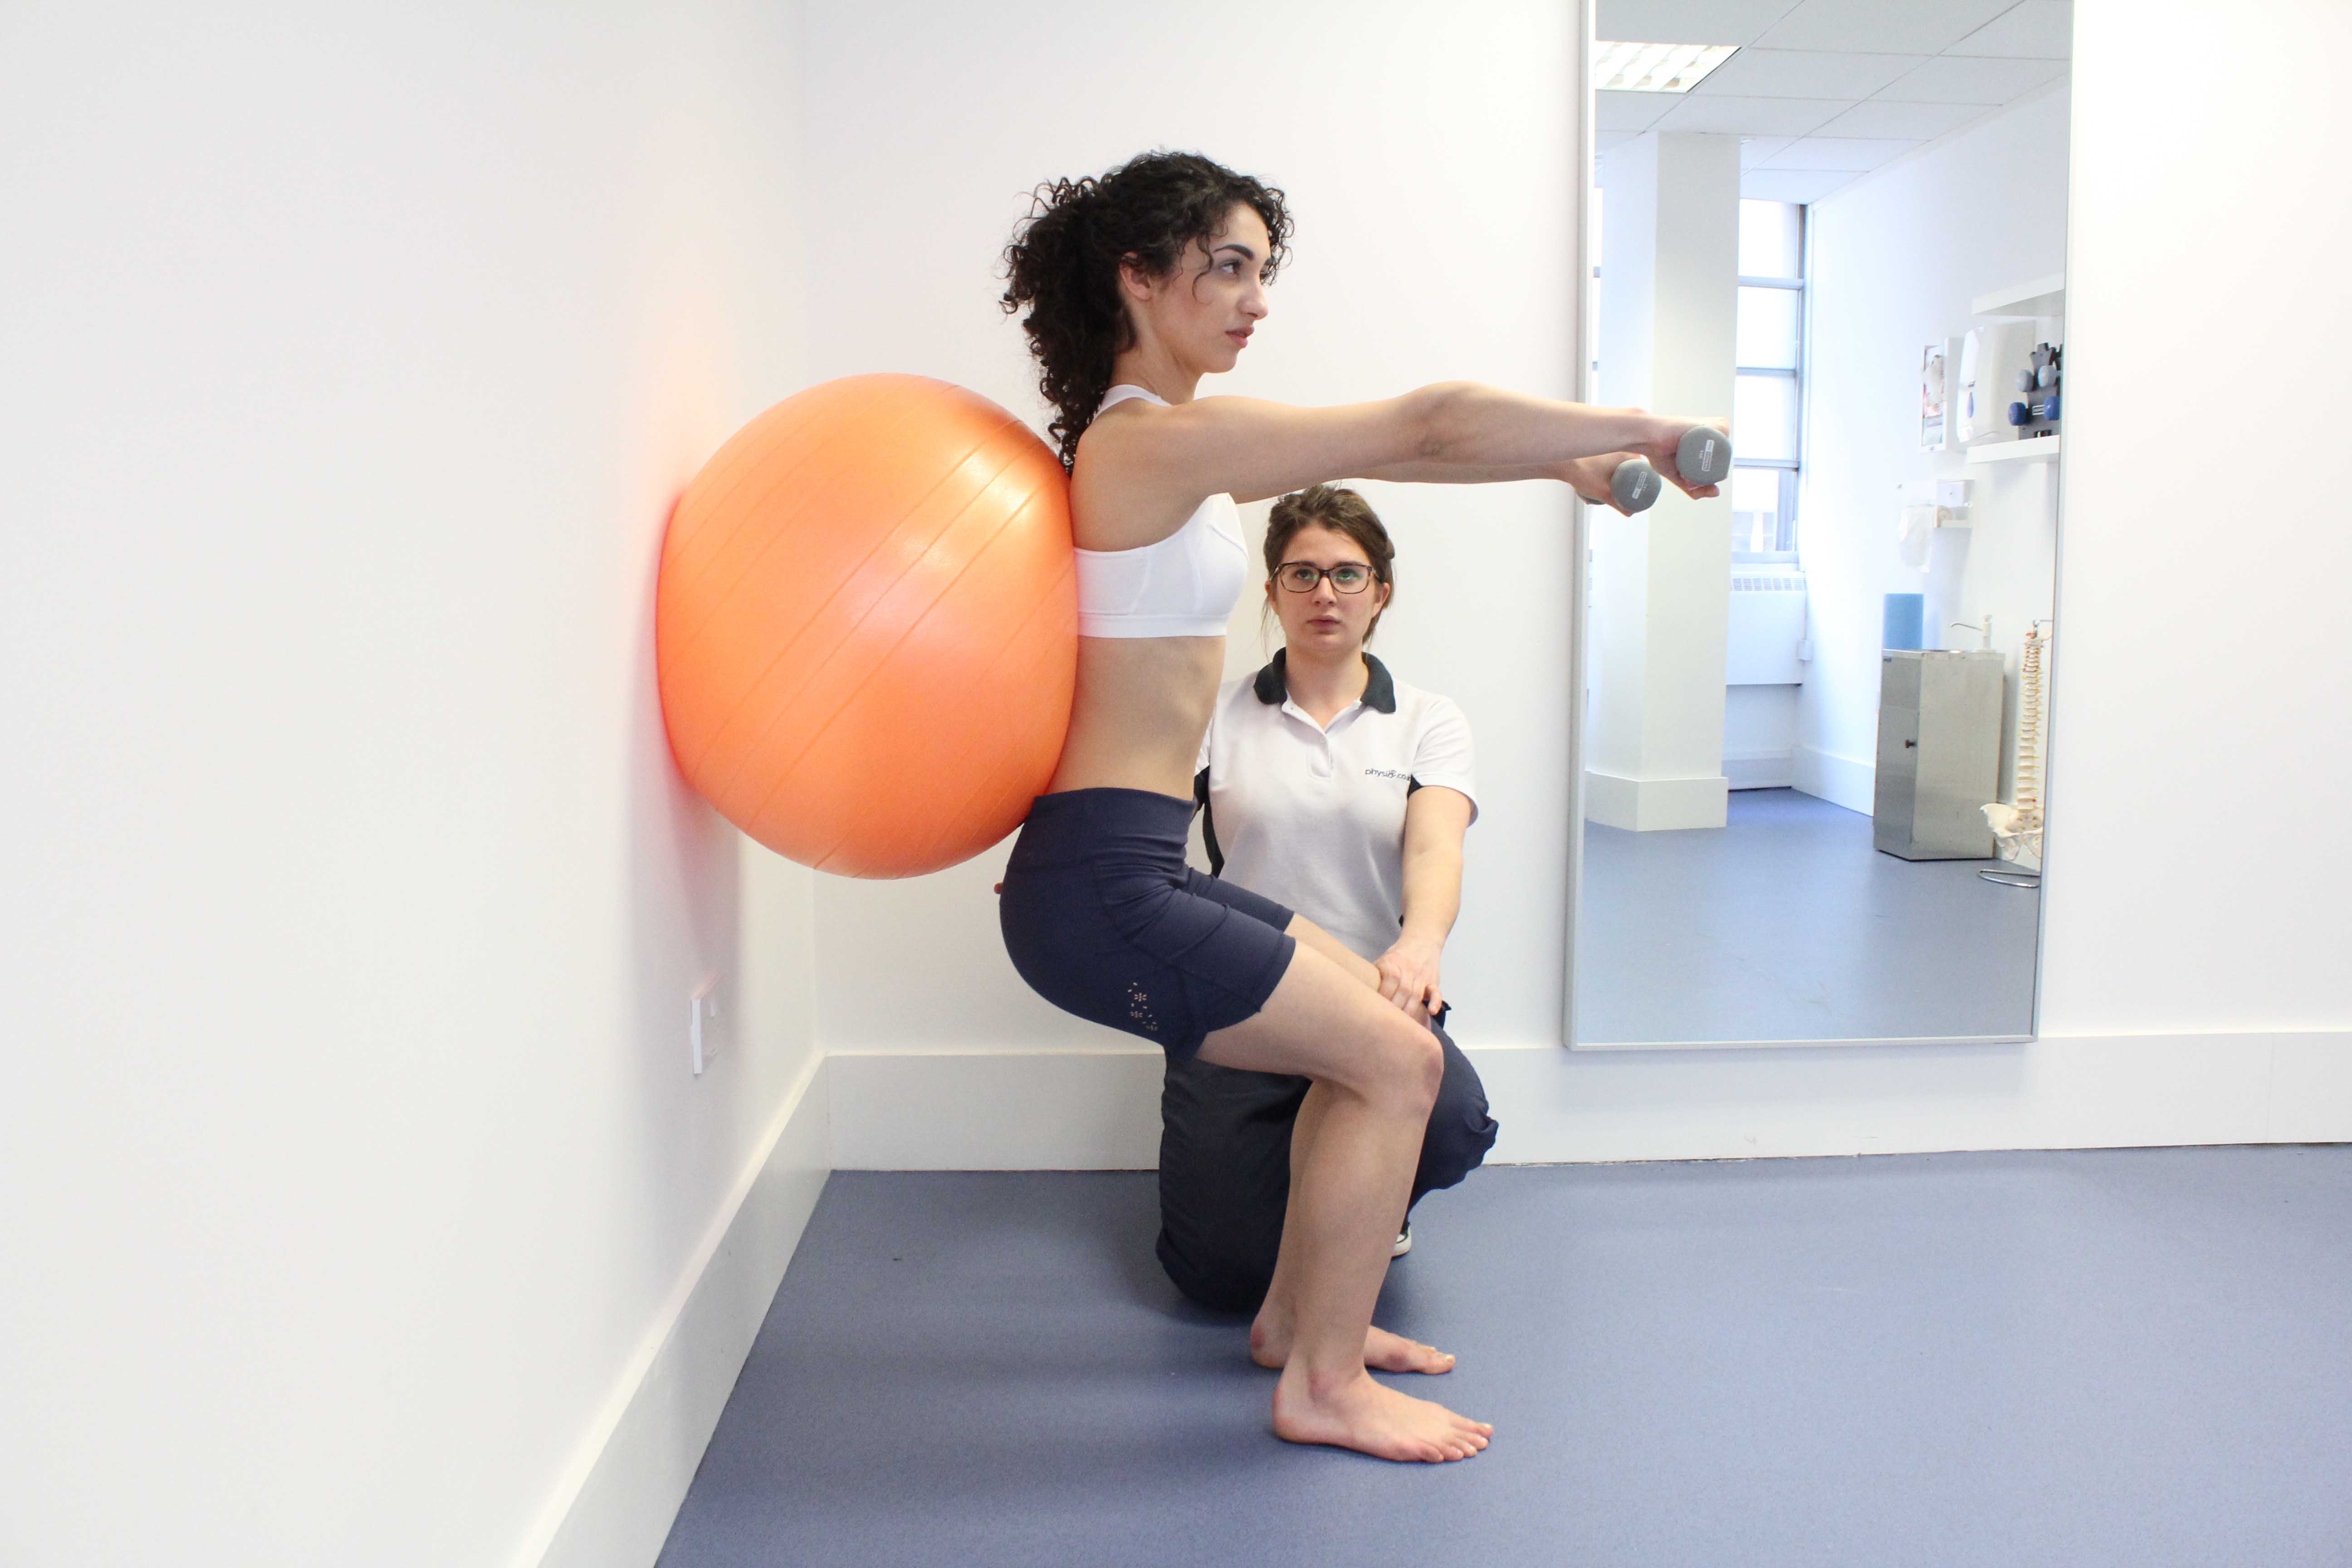 Leg strengthening exercises using squats and a gym ball with hand weights, under supervision of specialist MSK physiotherapist